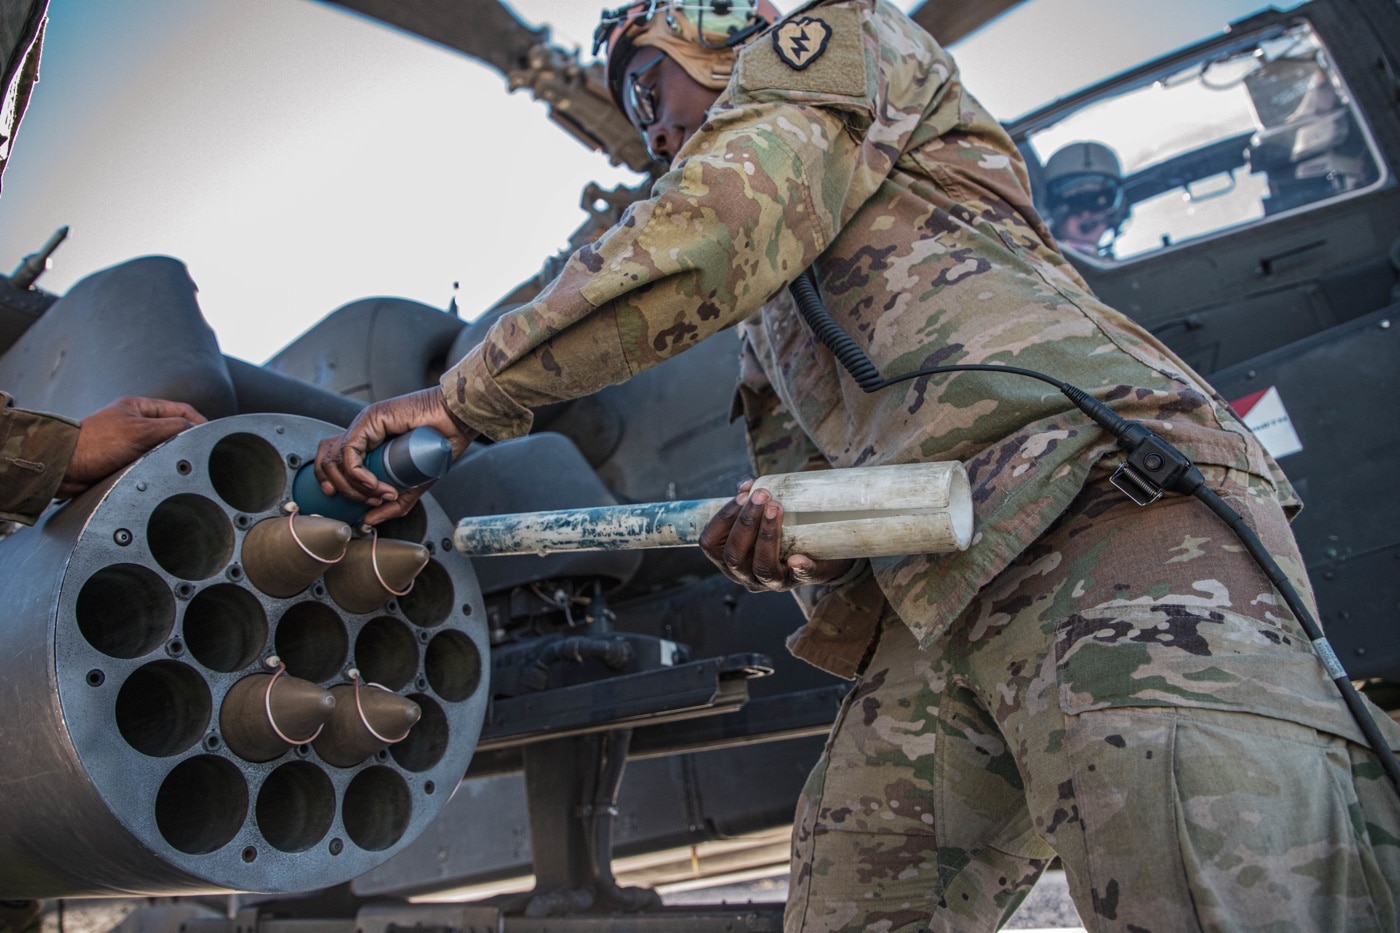 m261 rocket launcher being loaded on ah-64 attack helicopter